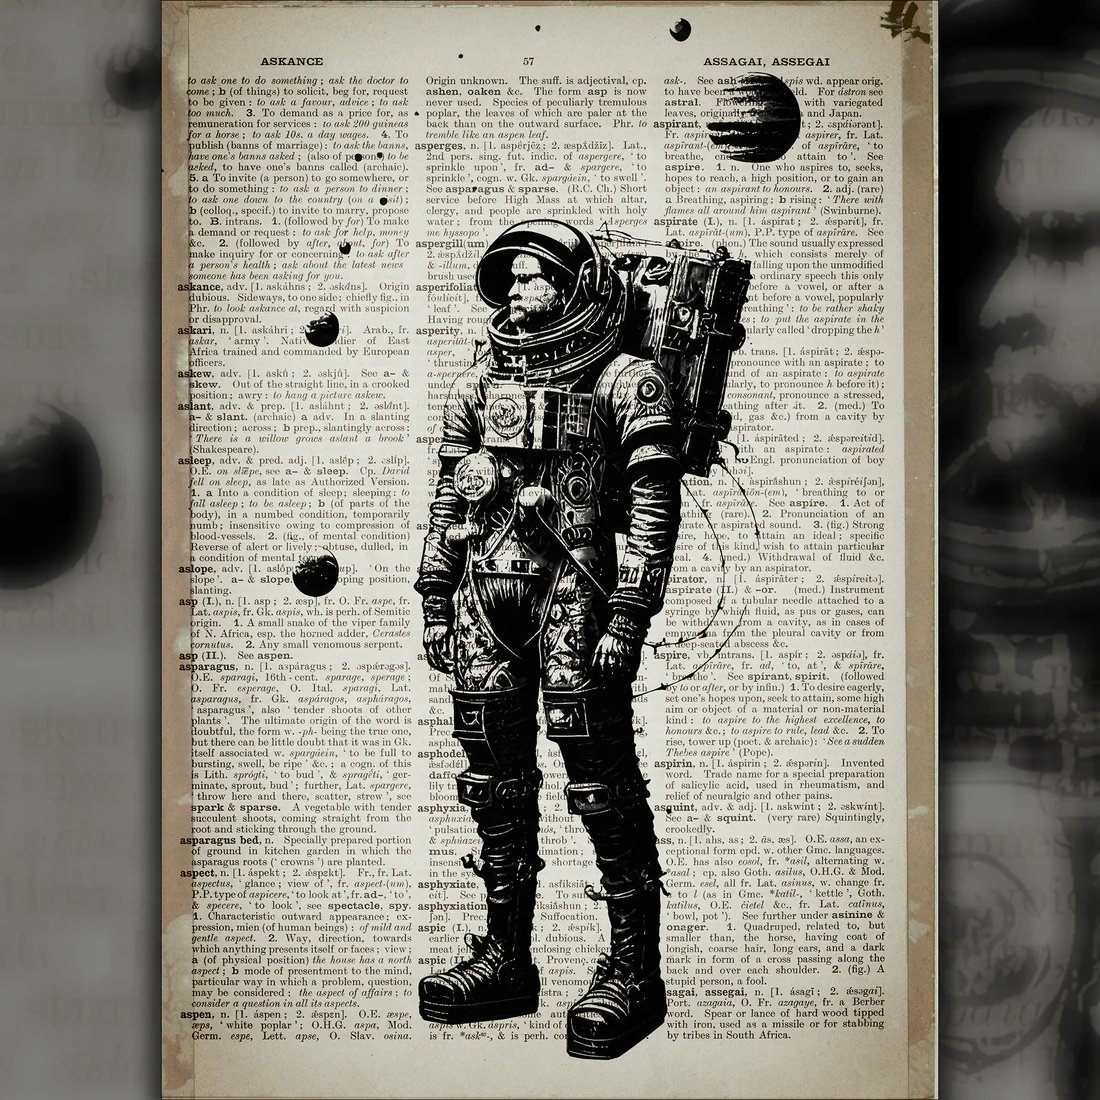 Introducing 'Futuristic Stargazer' – a limited series of 150 artistic prints capturing the essence of a standing astronaut amidst celestial bodies. #limitededition #prints #astronomy #scifiart artcursor.com/products/futur…